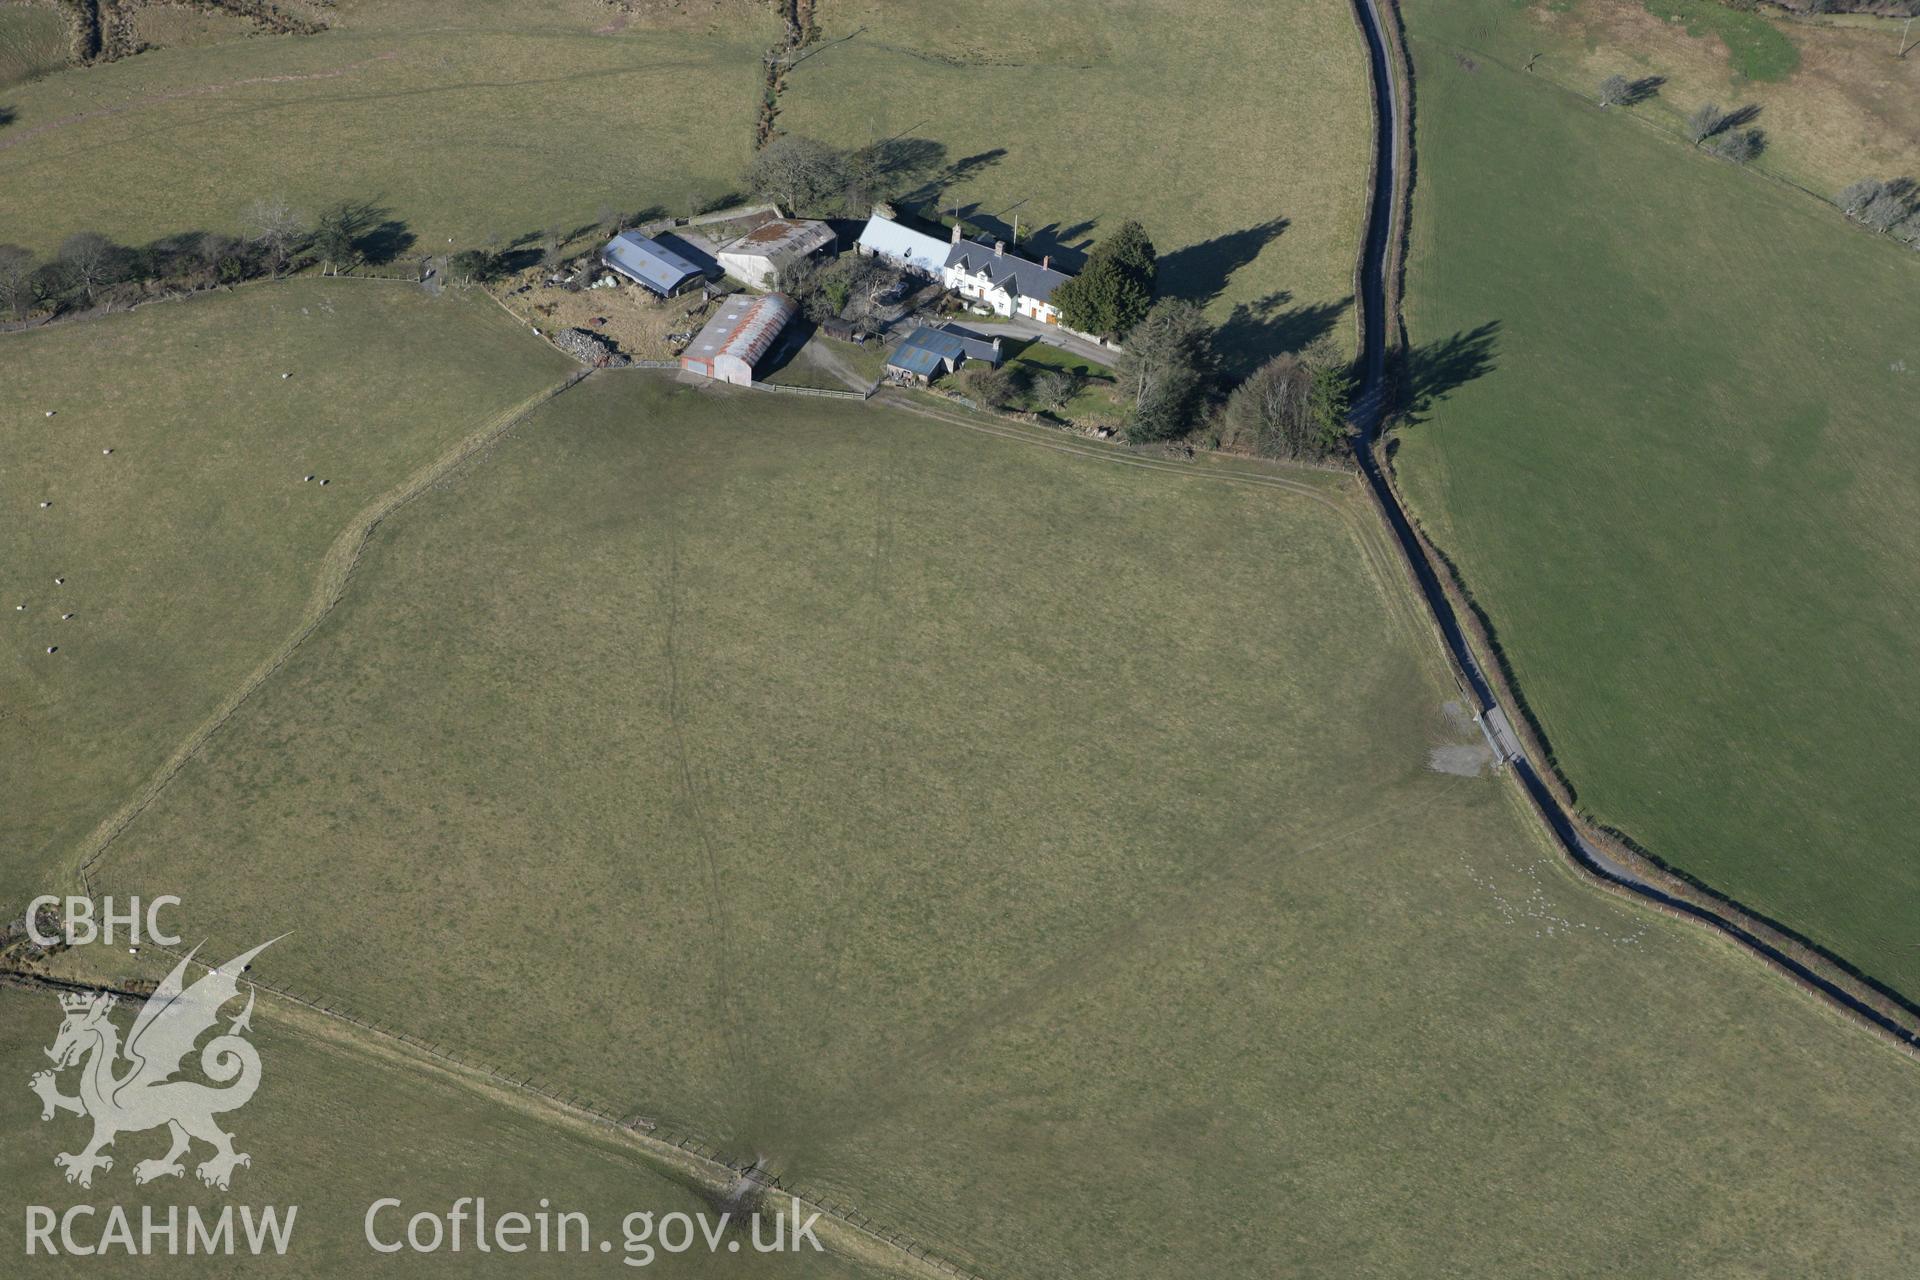 RCAHMW colour oblique photograph of Cefn Caer Roman Fort. Taken by Toby Driver on 08/03/2010.